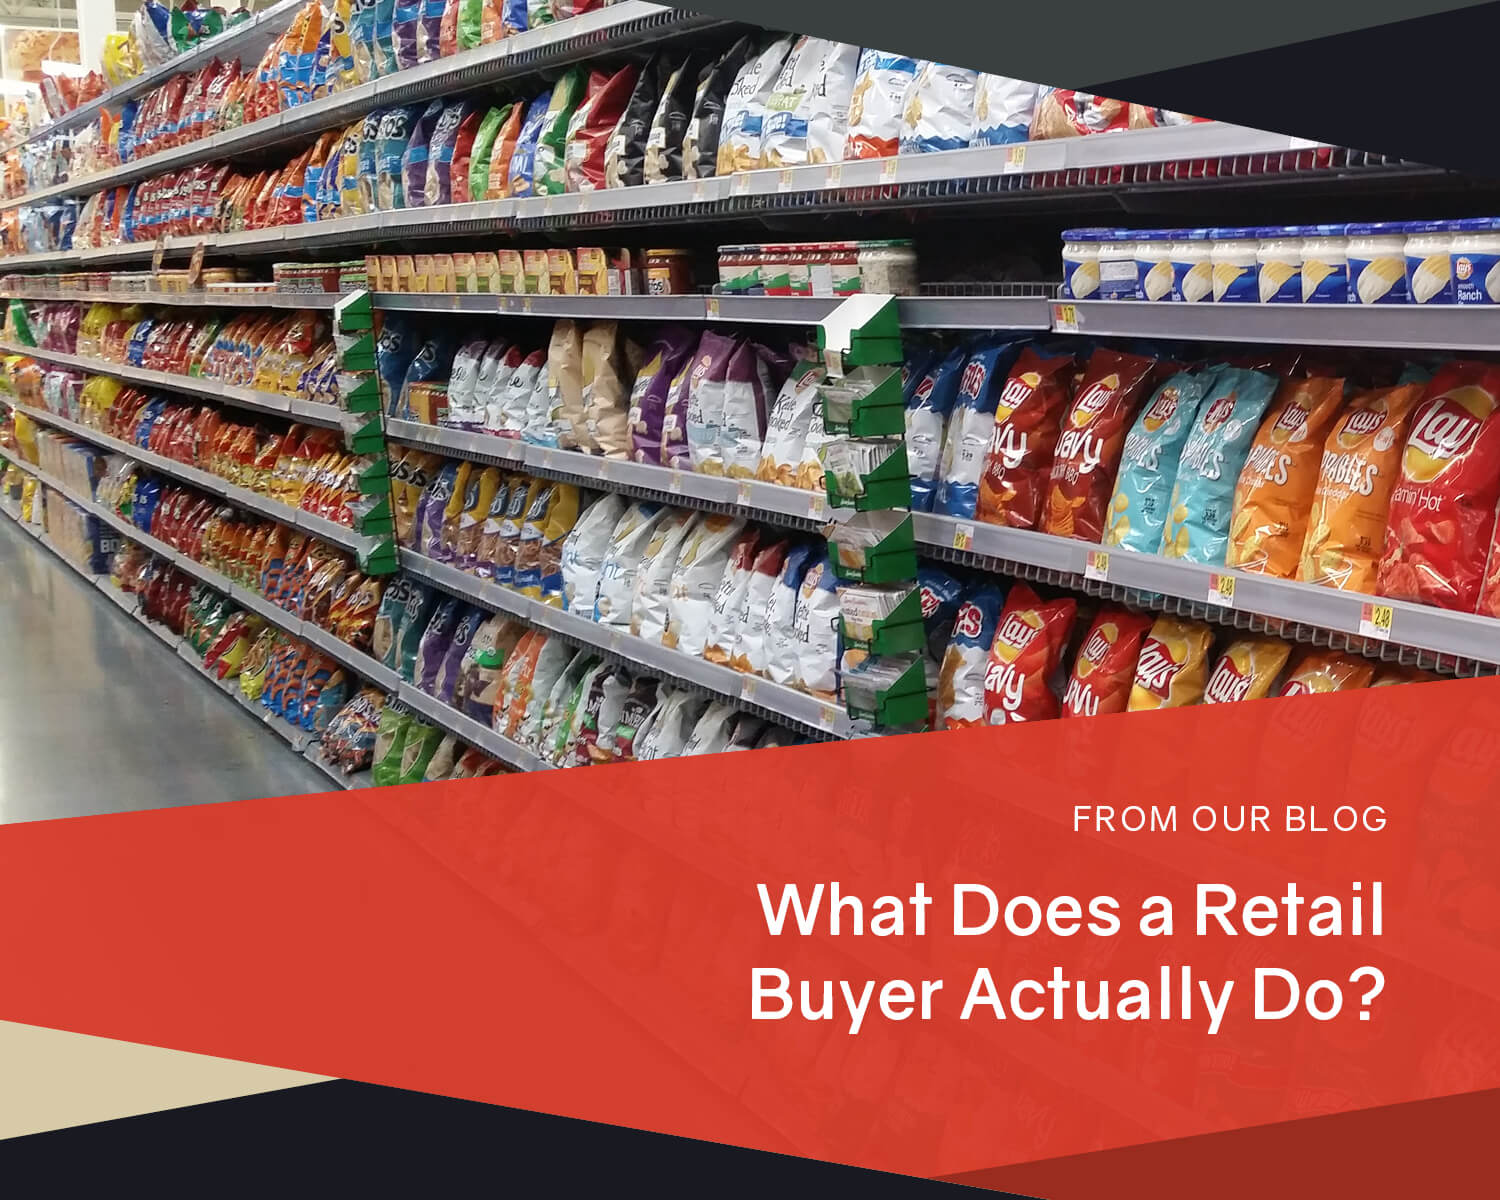 What Does a Retail Buyer Actually Do?